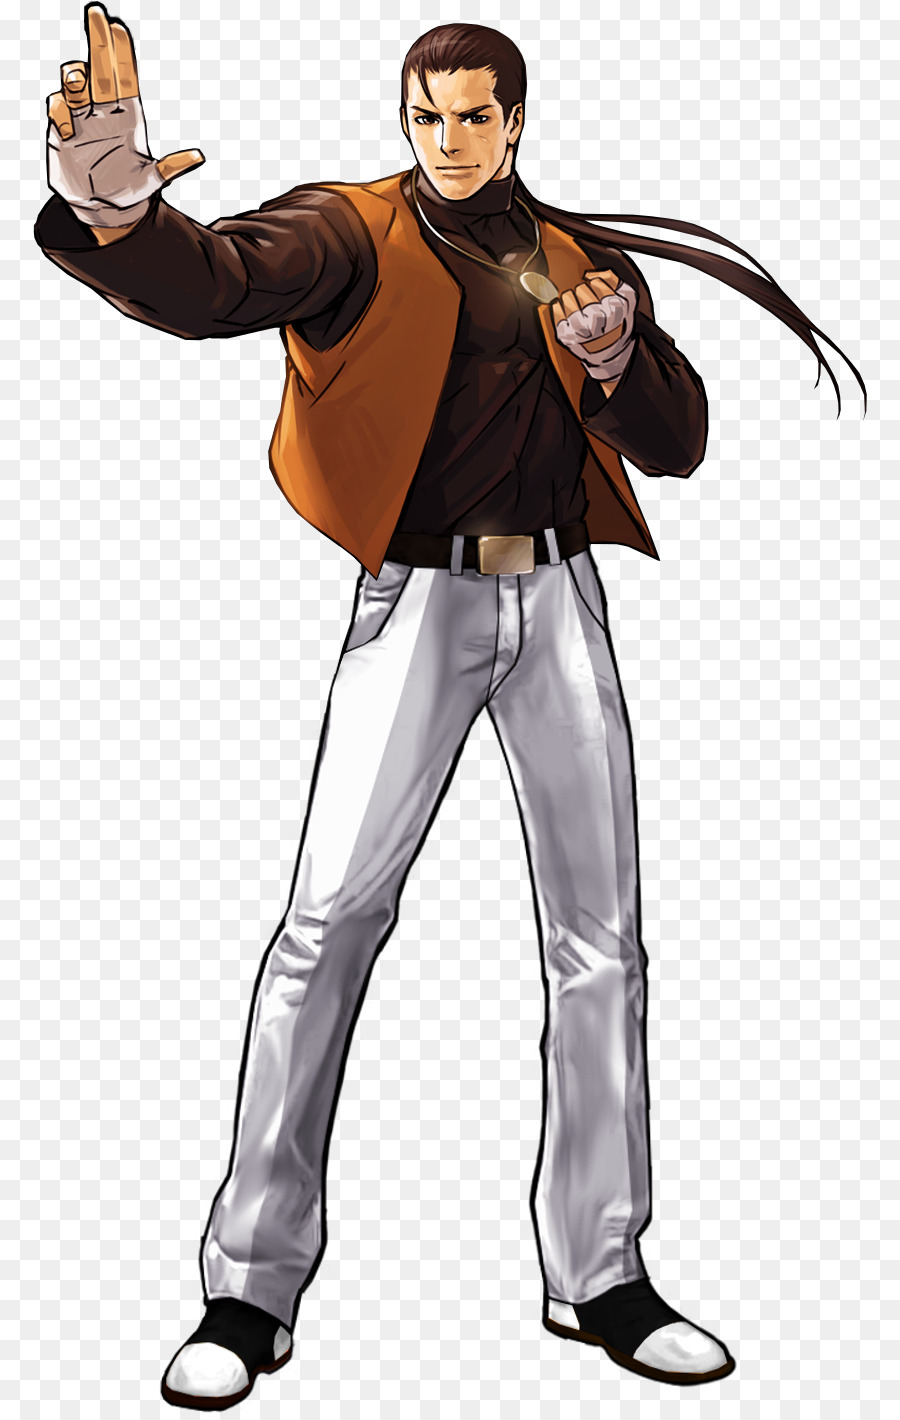 The King of Fighters 2002: Unlimited Match, The King of Fighters XIII The King of Fighters XIV Iori Yagami - 65